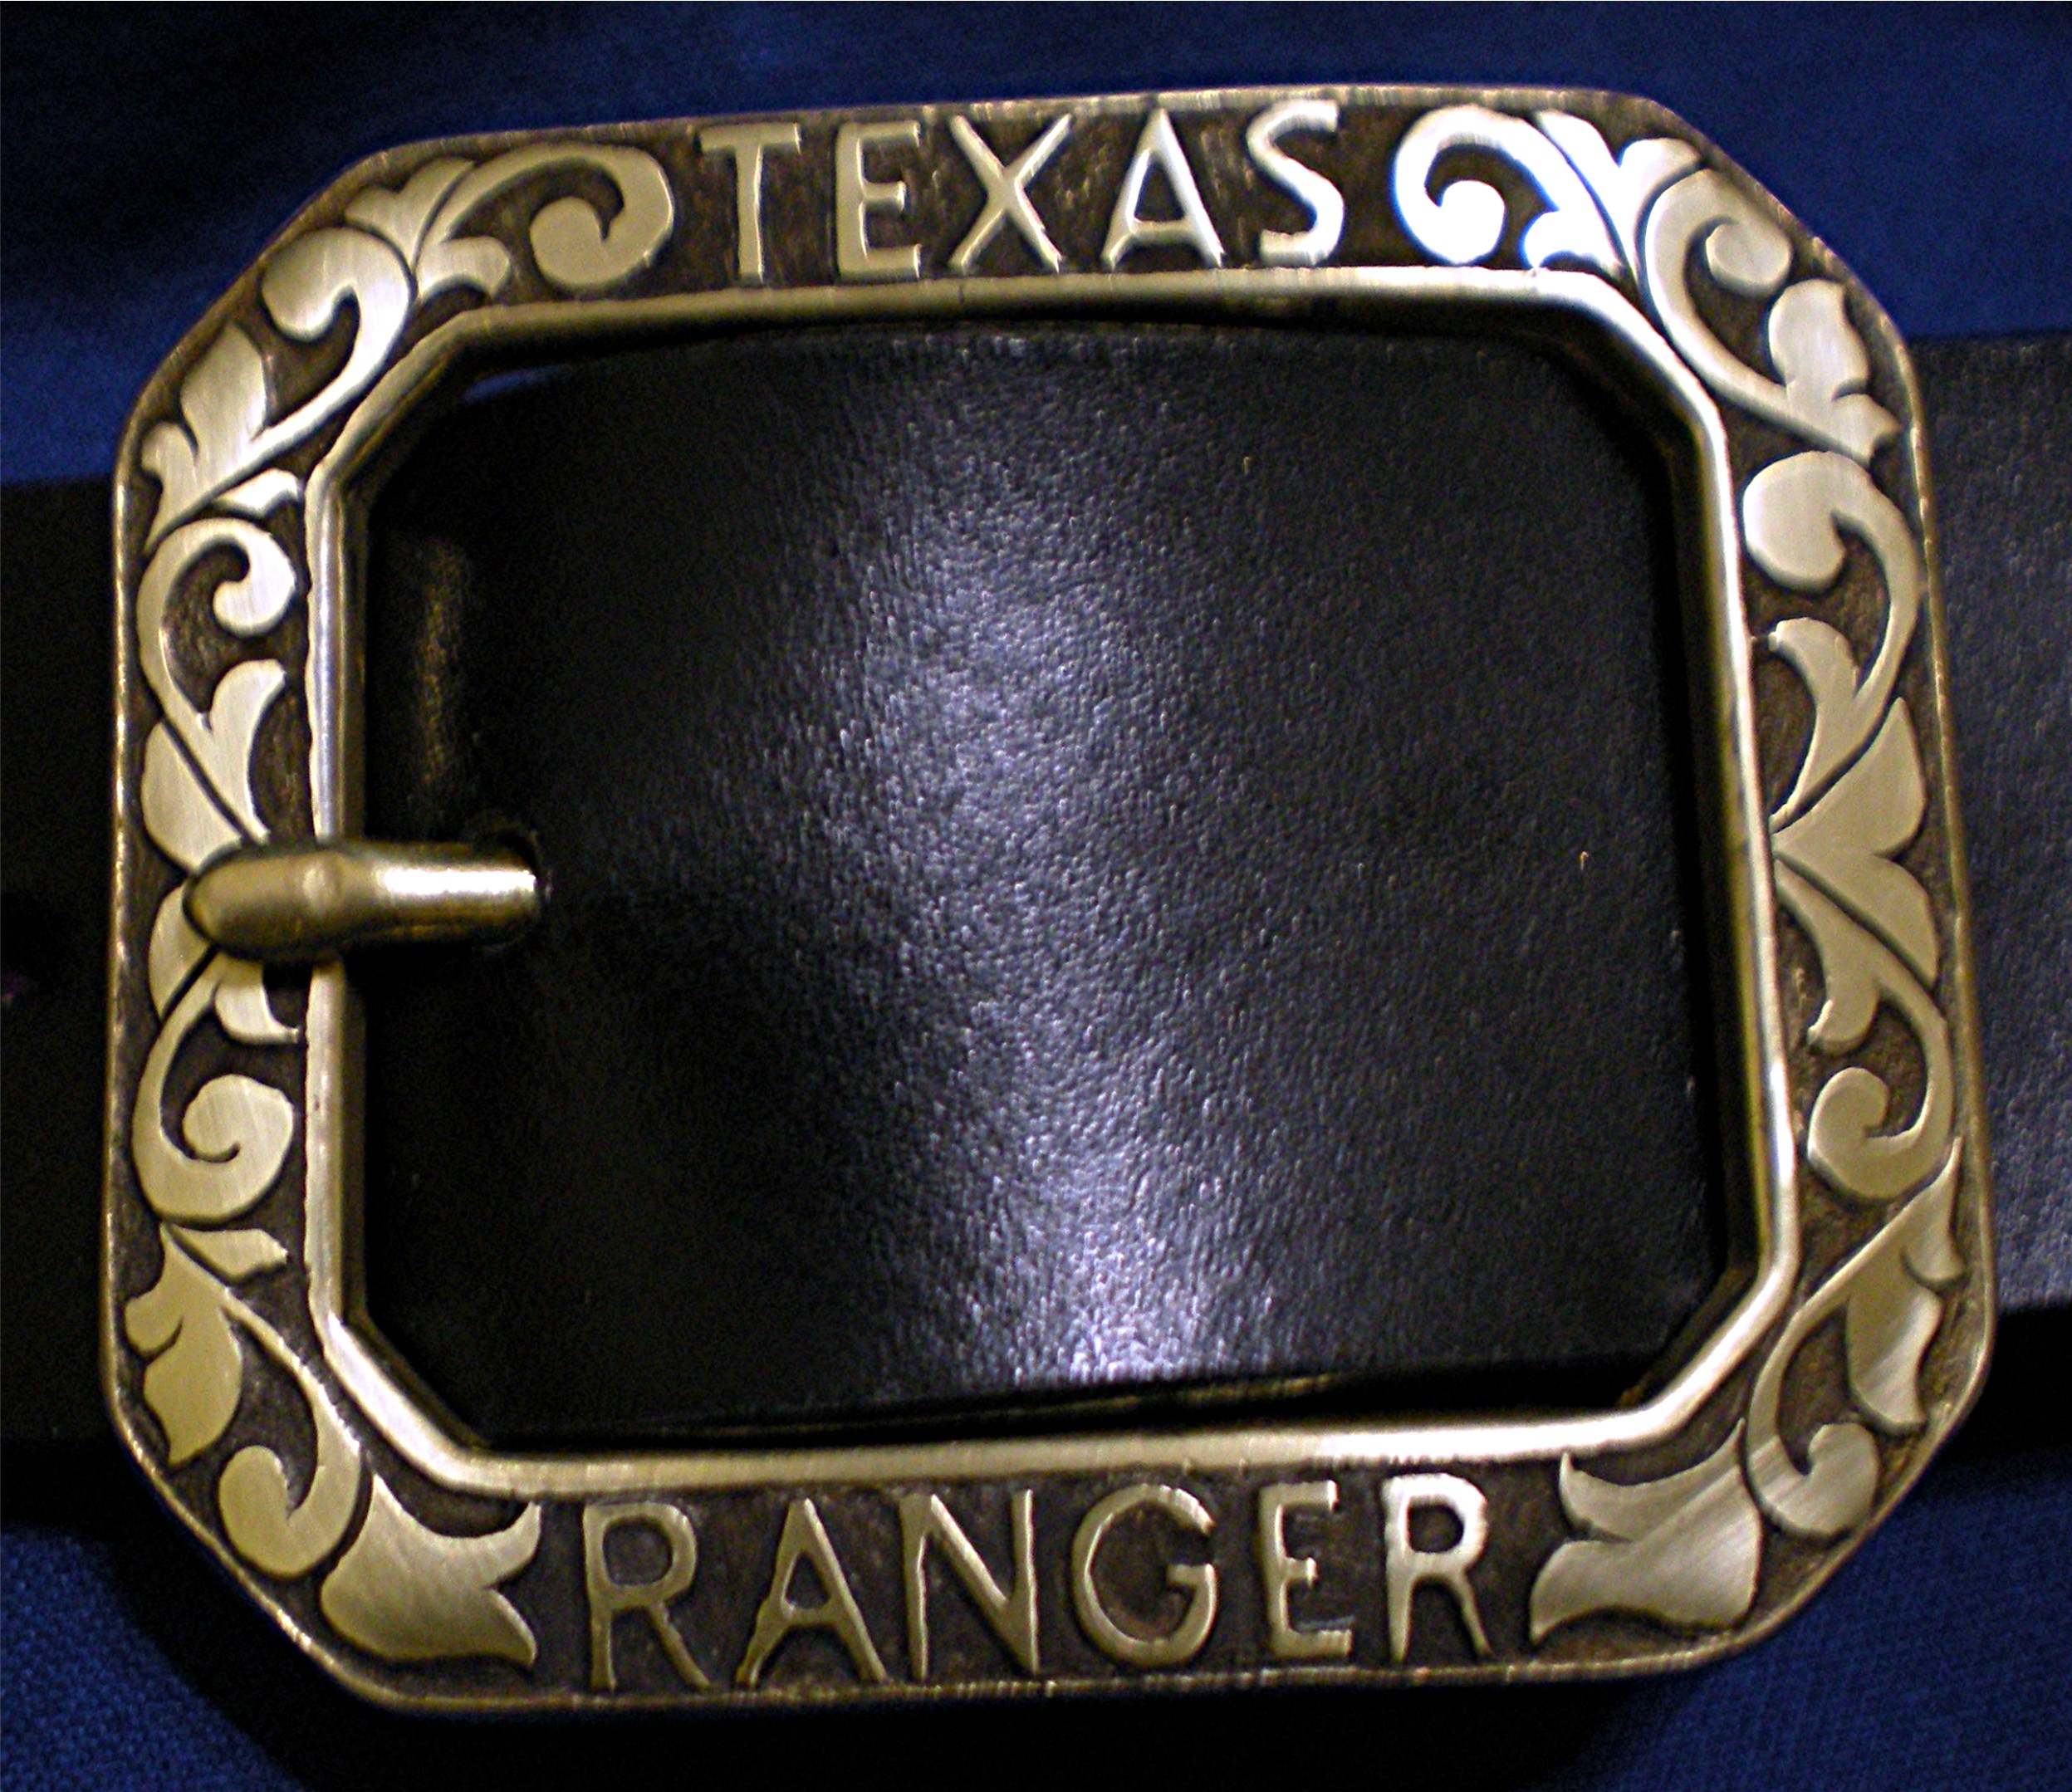 NEW BUCKLES | Old West Leather, Buckles, Cowboy Holsters, Custom Western Belts